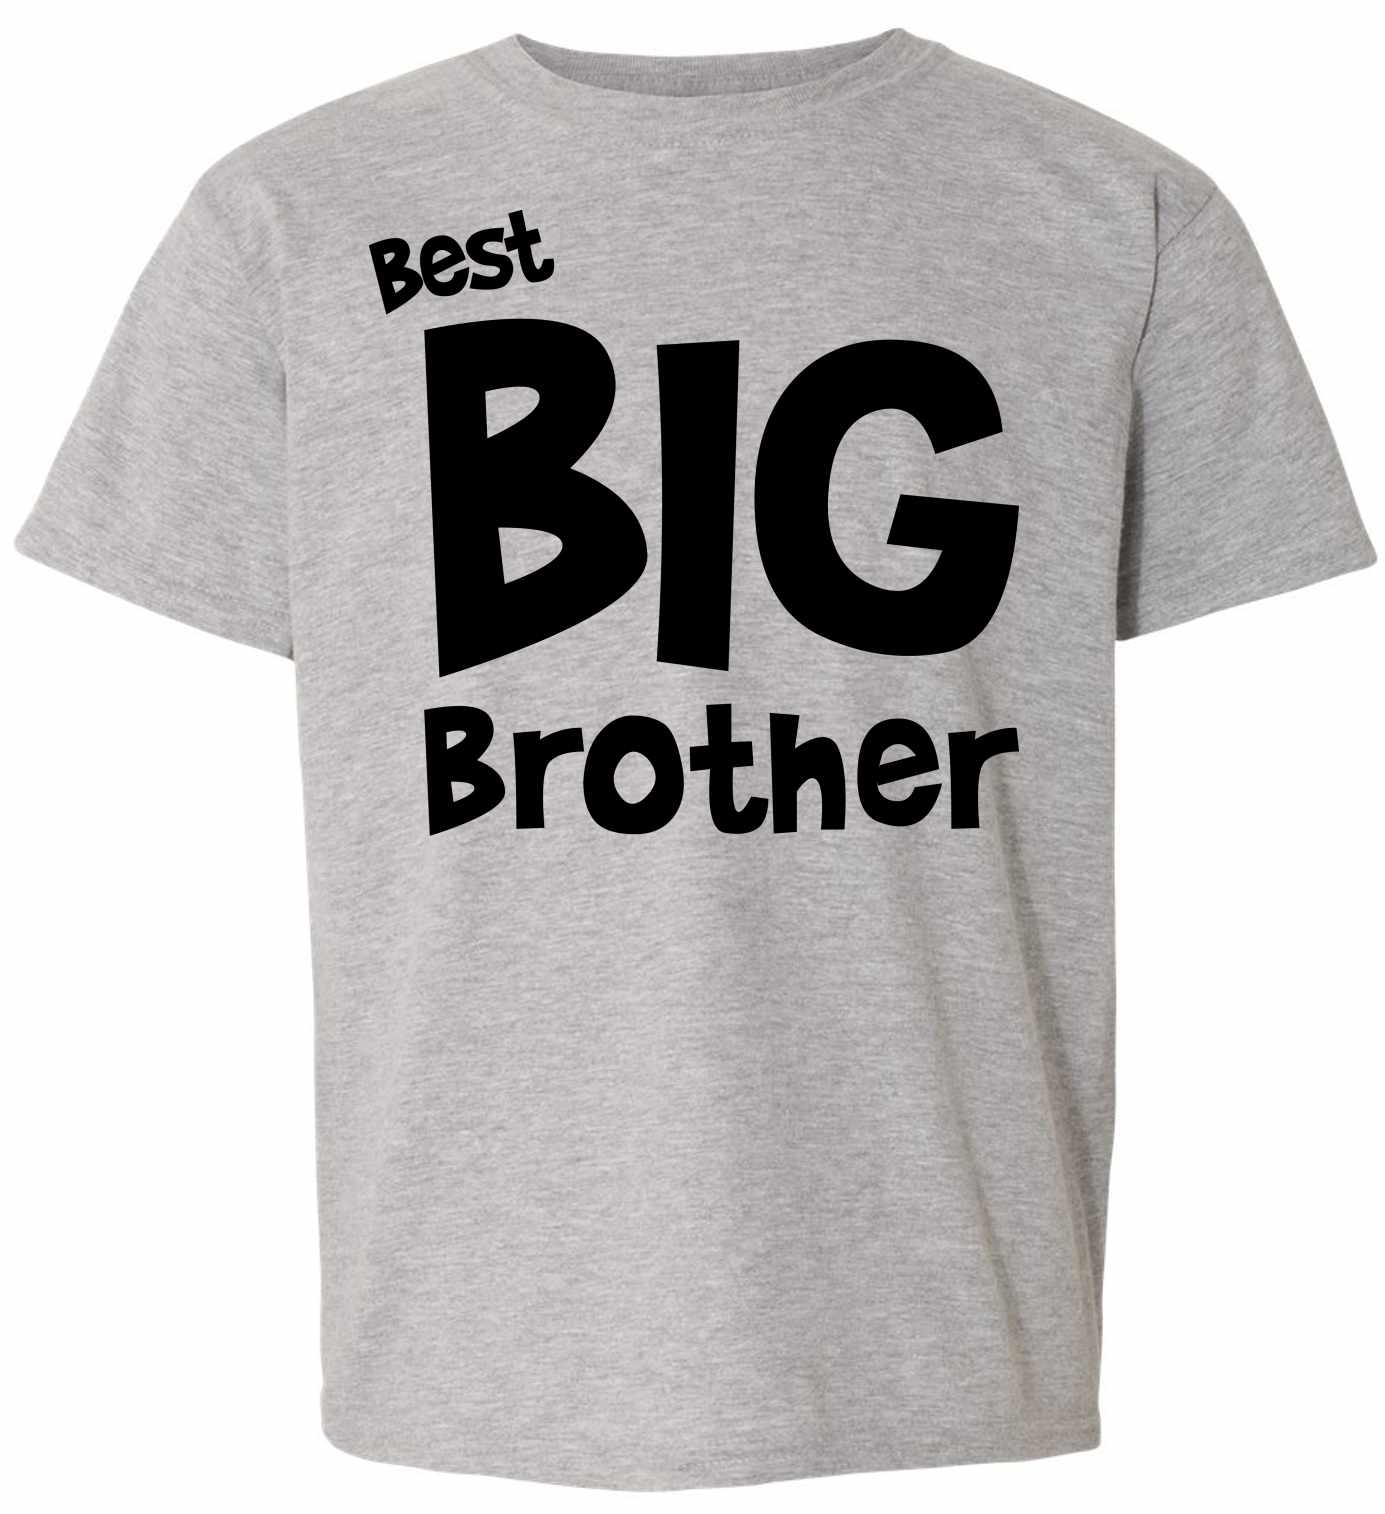 Best Big Brother on Youth T-Shirt (#1138-201)